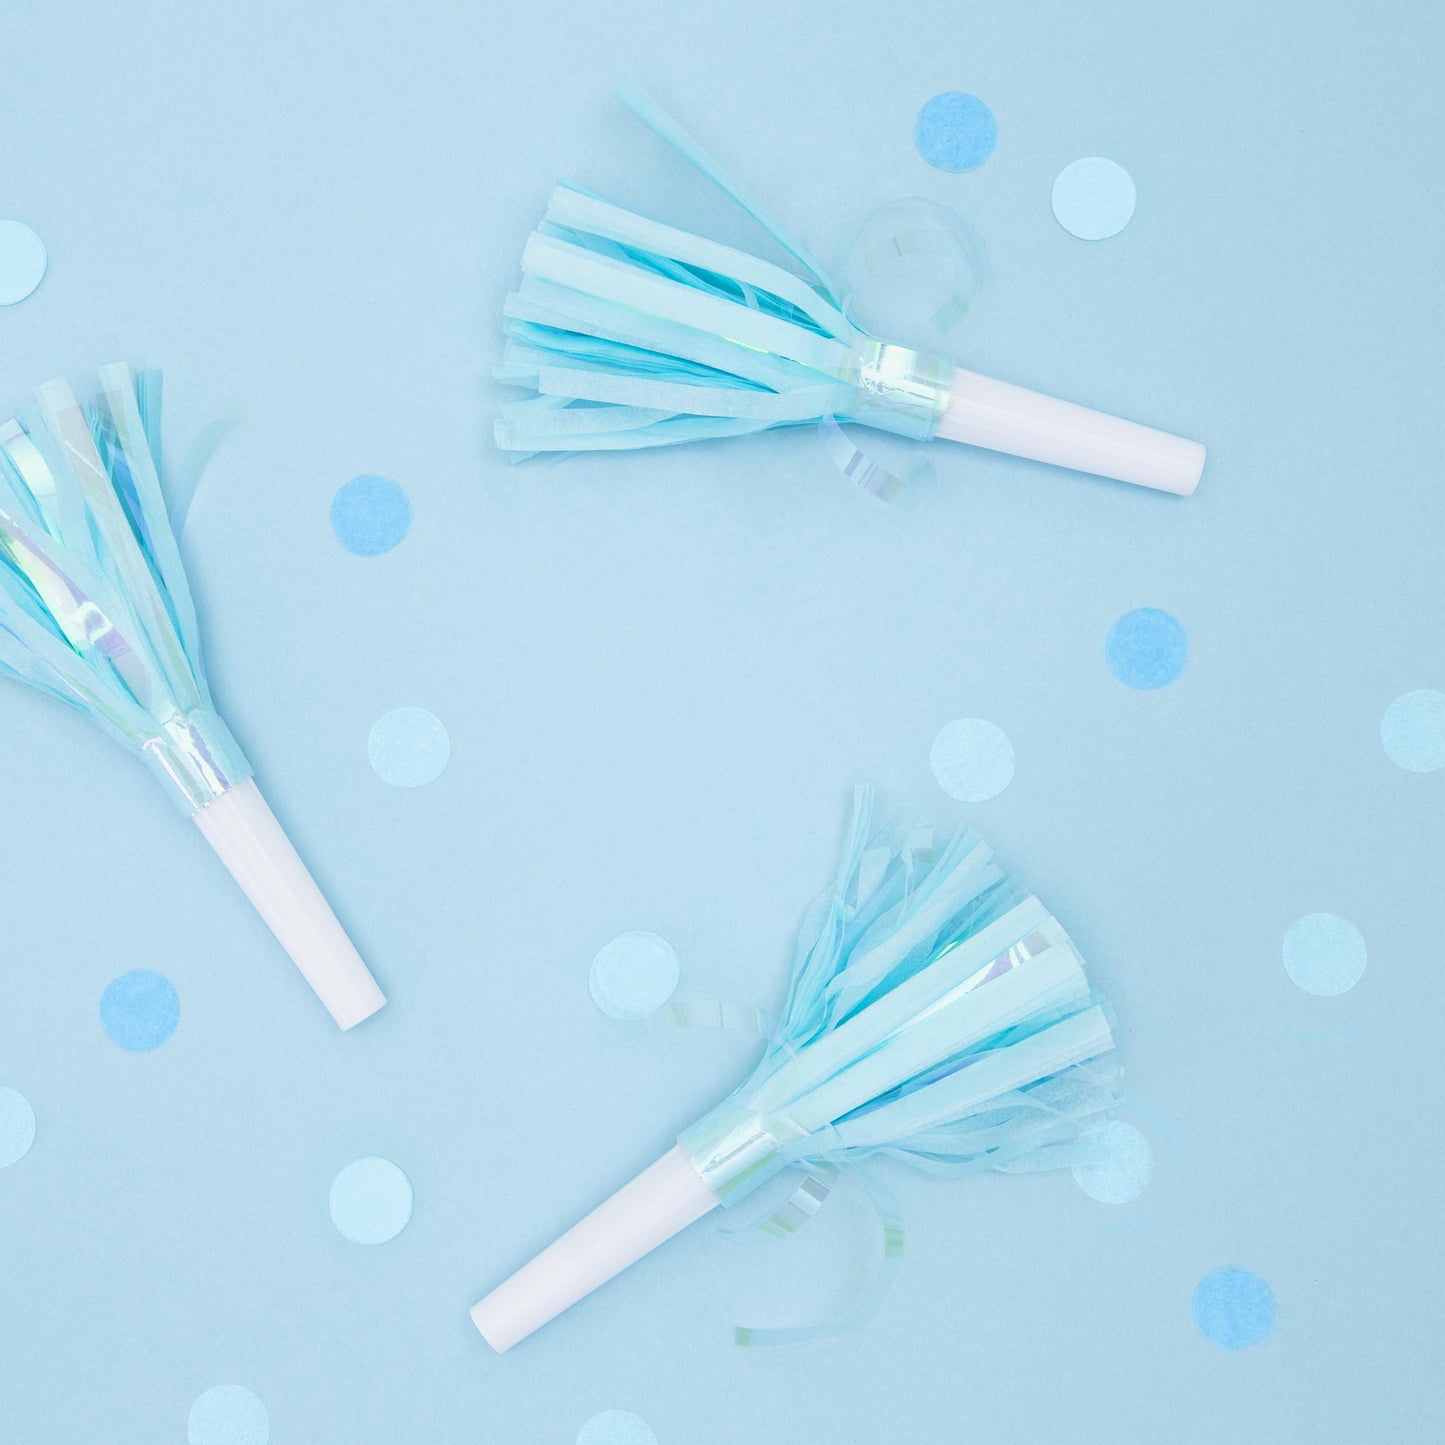 Fringed Party Horn Blowers | Party Noisemakers | Party Accessories UK Party Deco